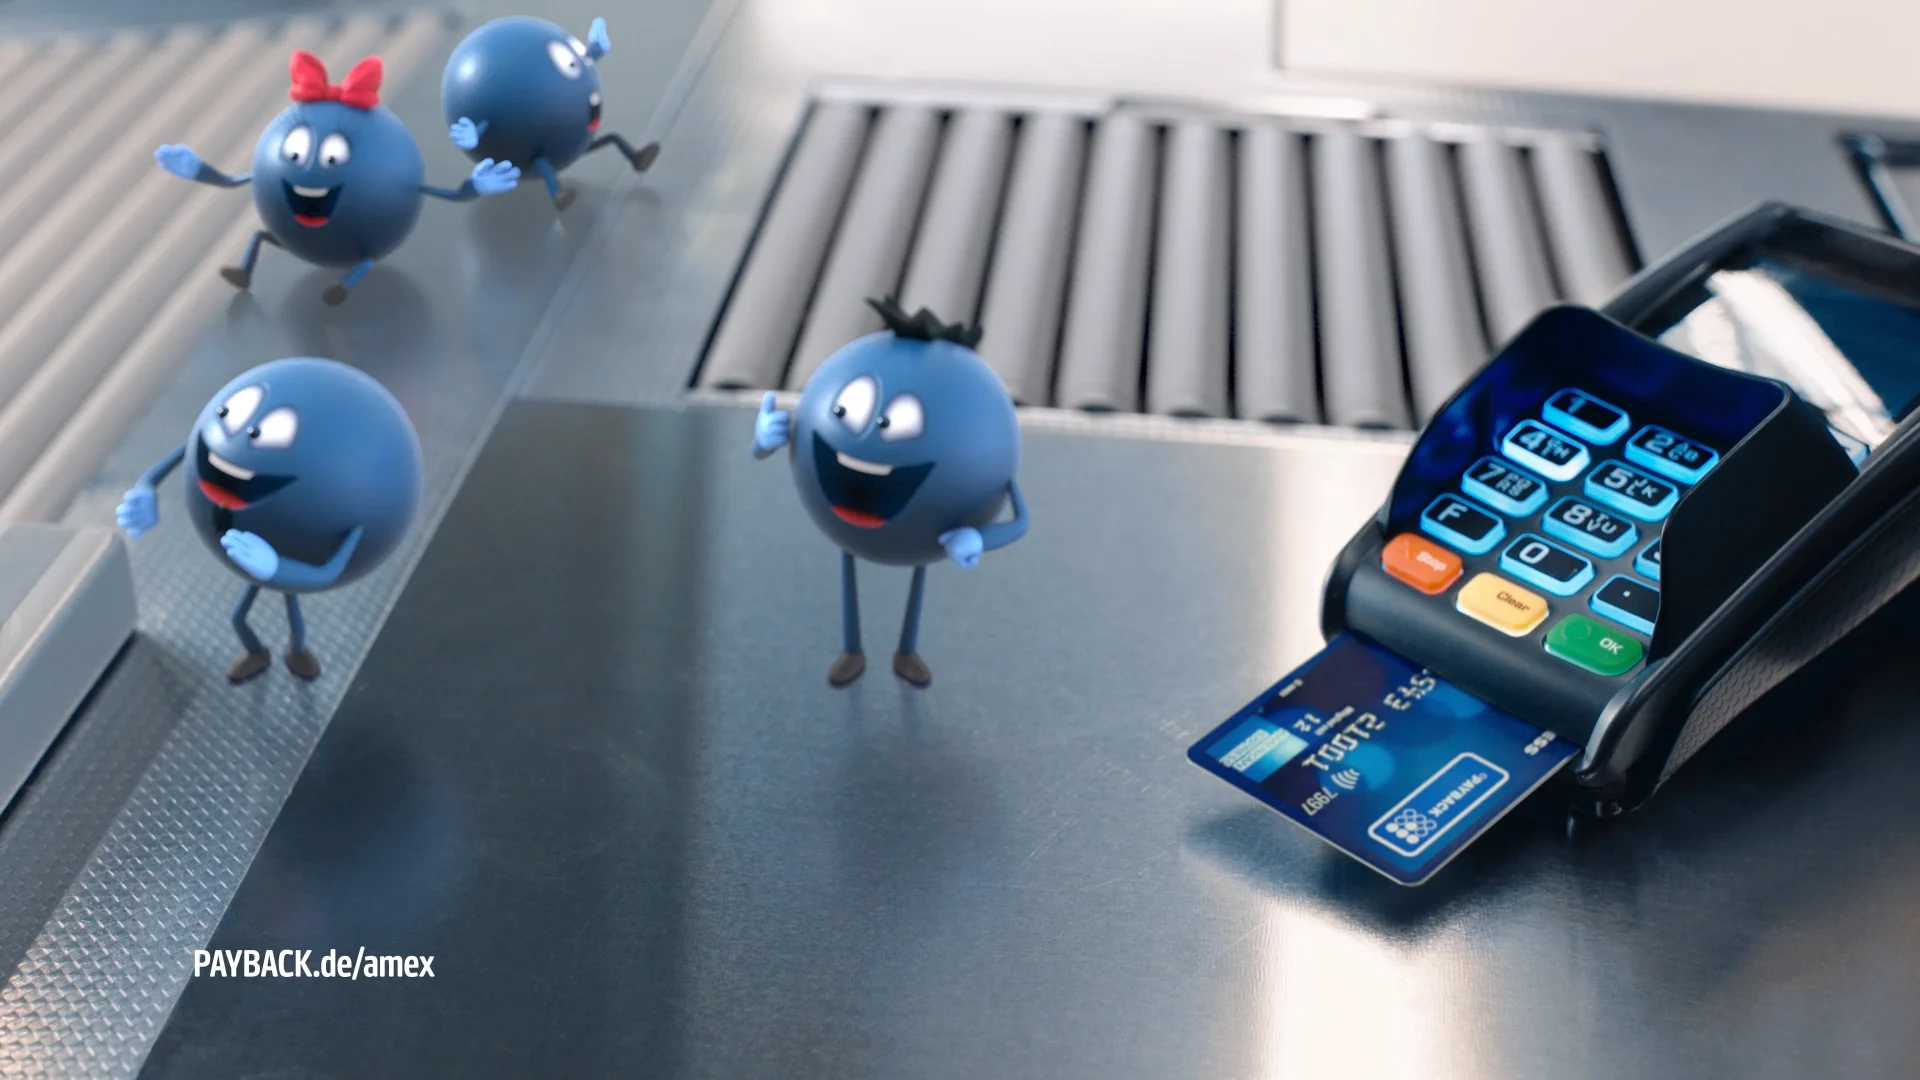 four blue 3d characters with different accessoires smiling and performing on a till tape next to a card reader with a payback card in it